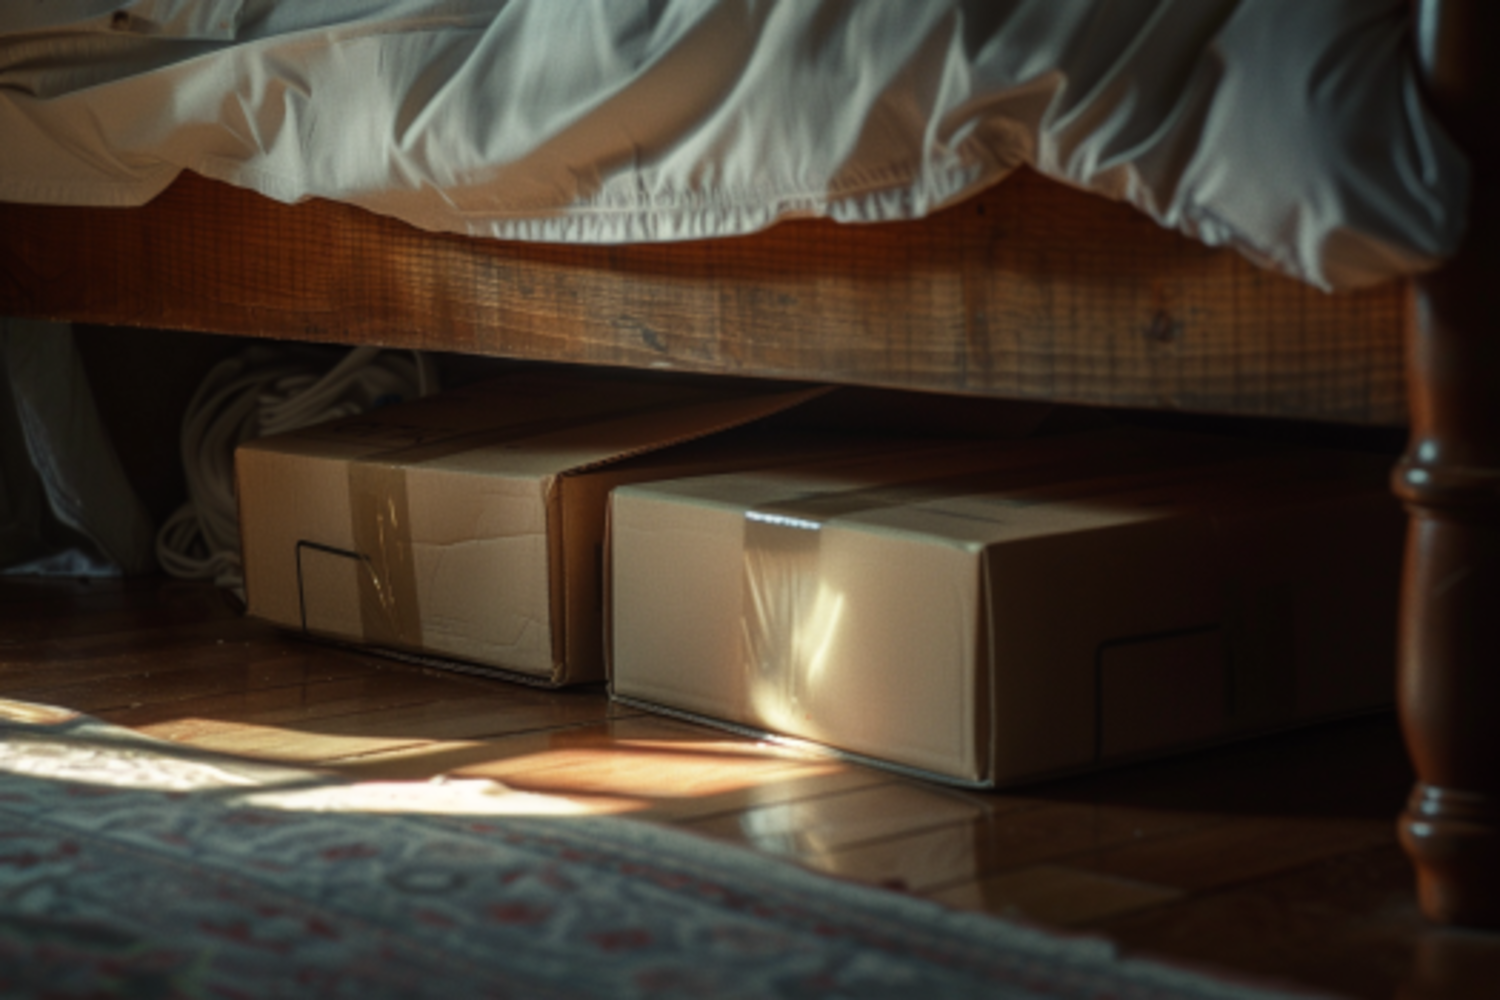 Two boxes under the bed | Source: Midjourney